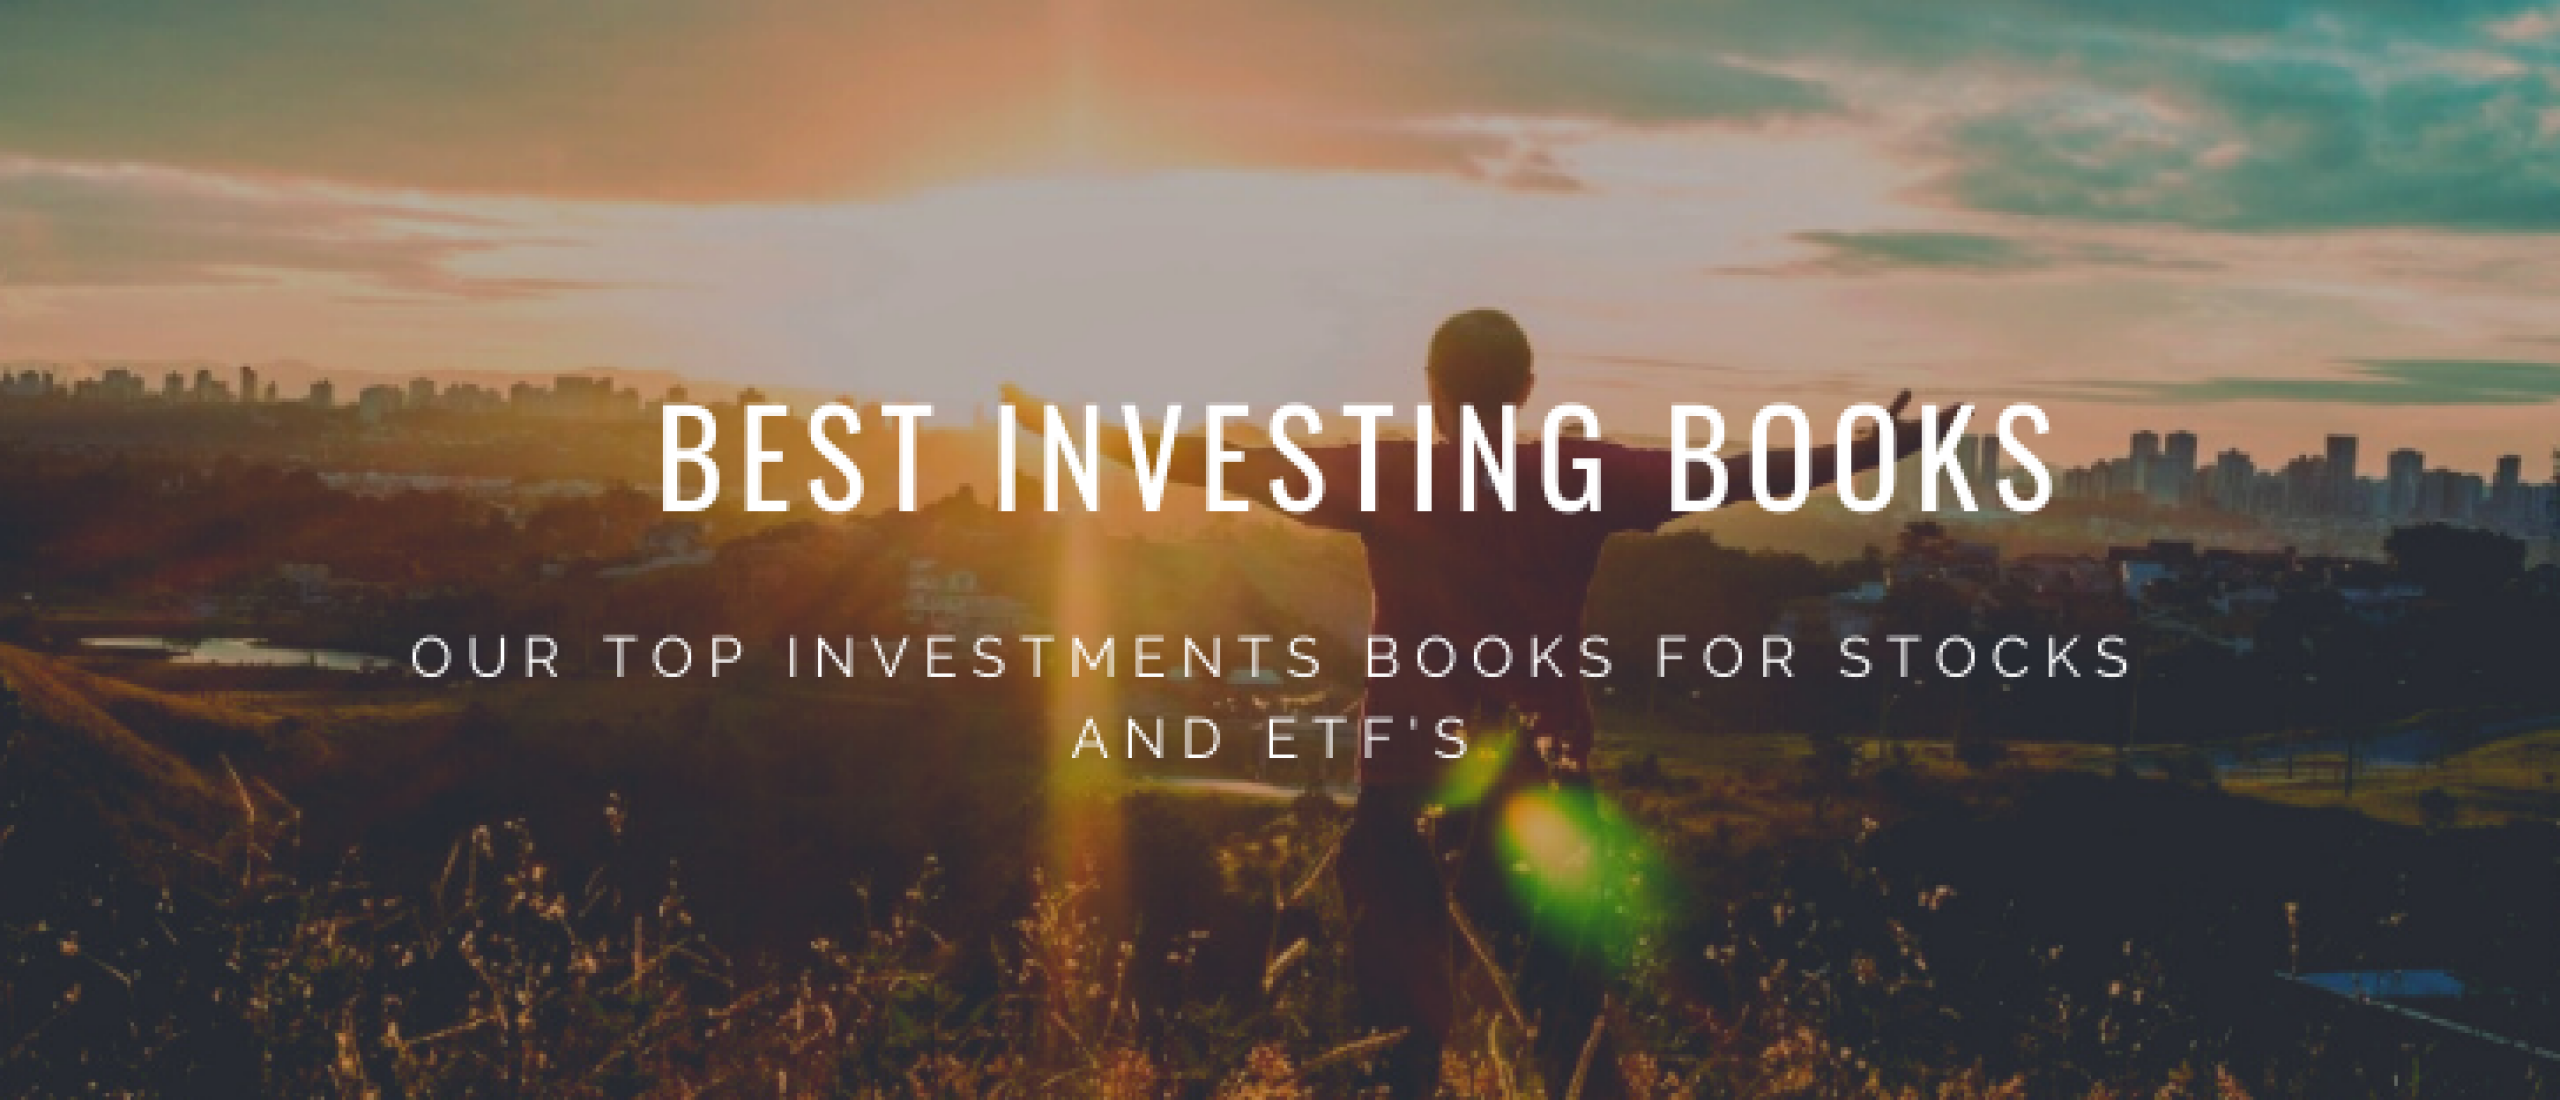 TOP 12 Best Investing Books of All Time to Improve Wealth